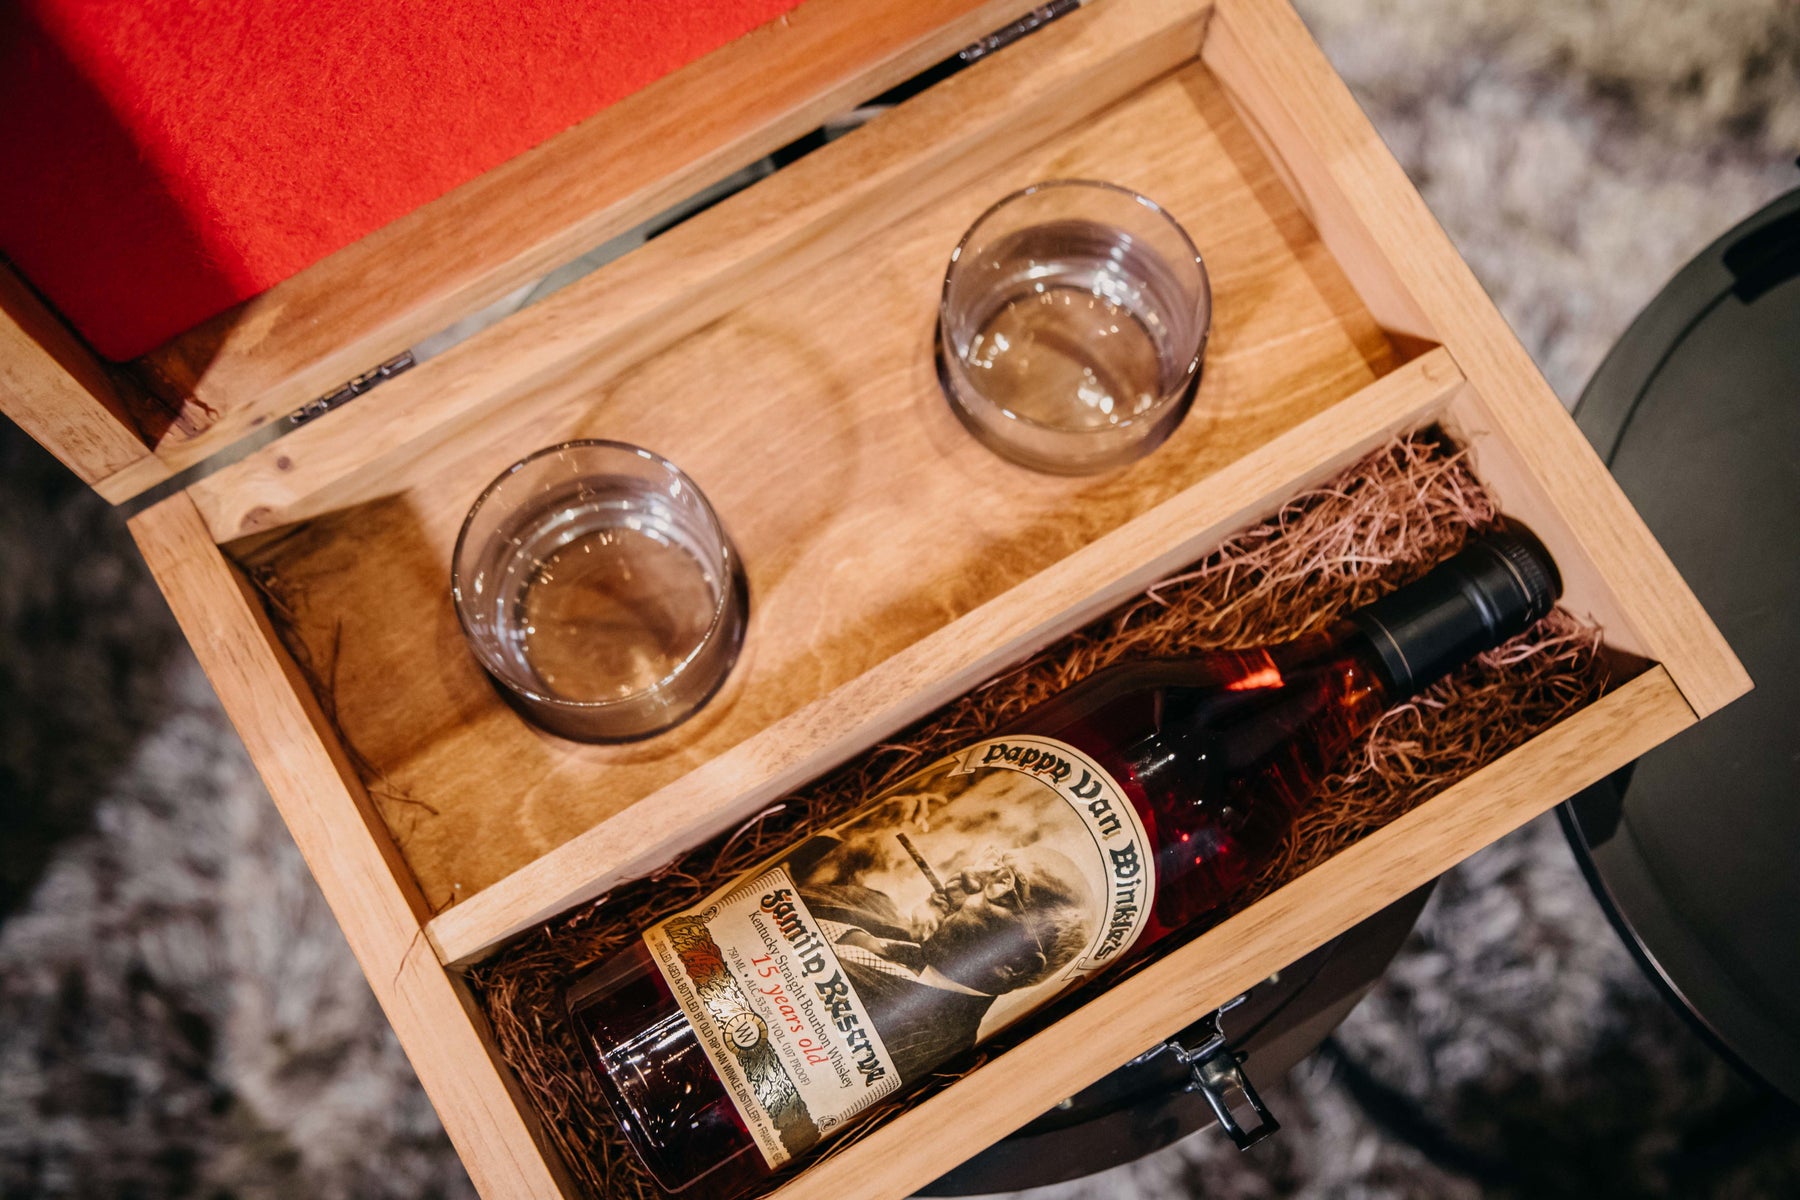 Boss Man" Pappy Van Winkle 15 Year Bourbon Handcrafted Gift Box – The Bourbon Concierge